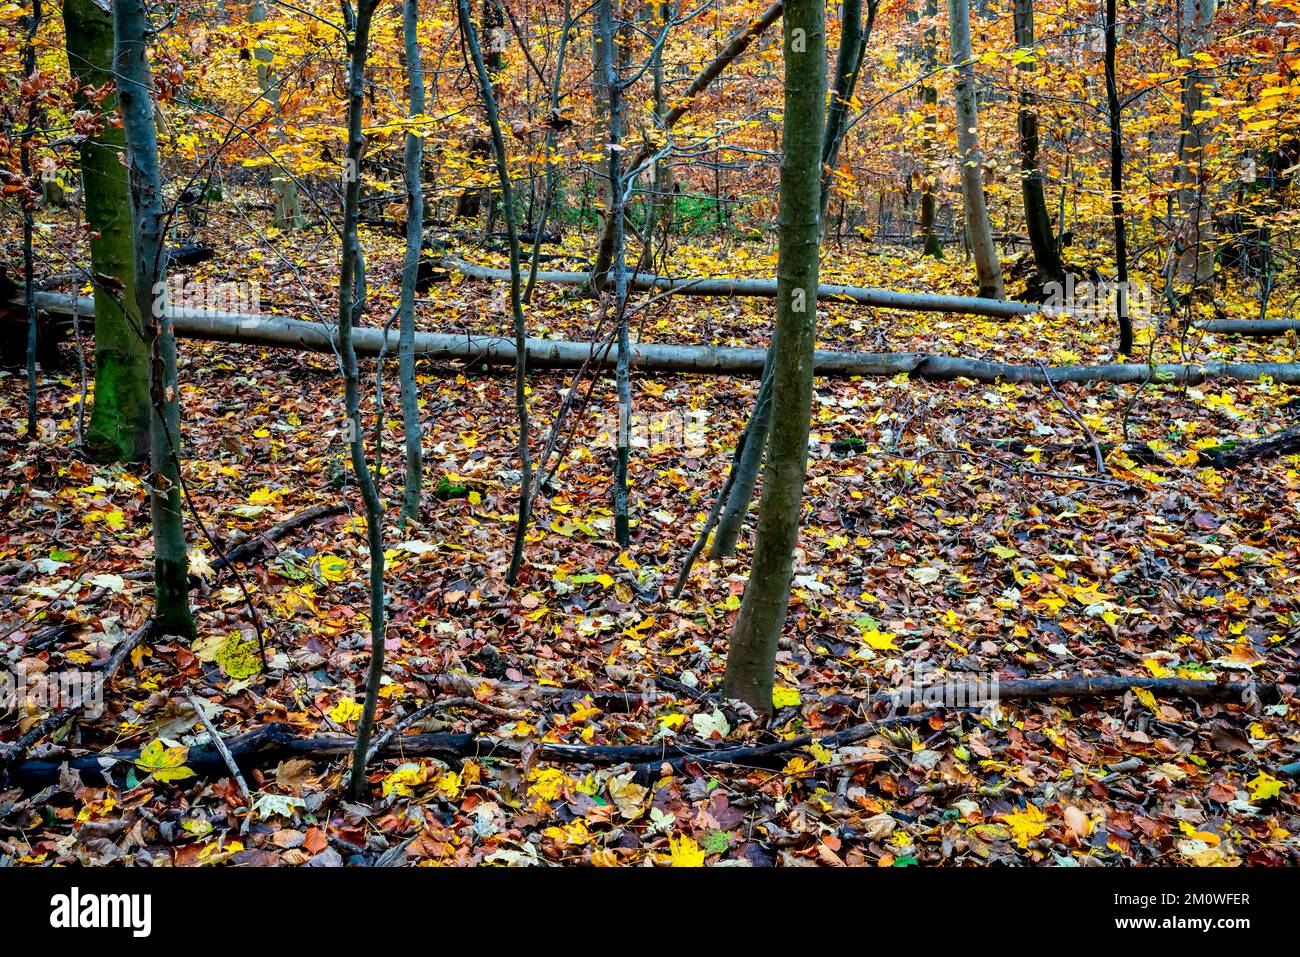 Autumn colors in Ausserberg and Mittelberg forest reserve (Riehen and Bettingen), Basel-Stadt Canton, Switzerland. Stock Photo